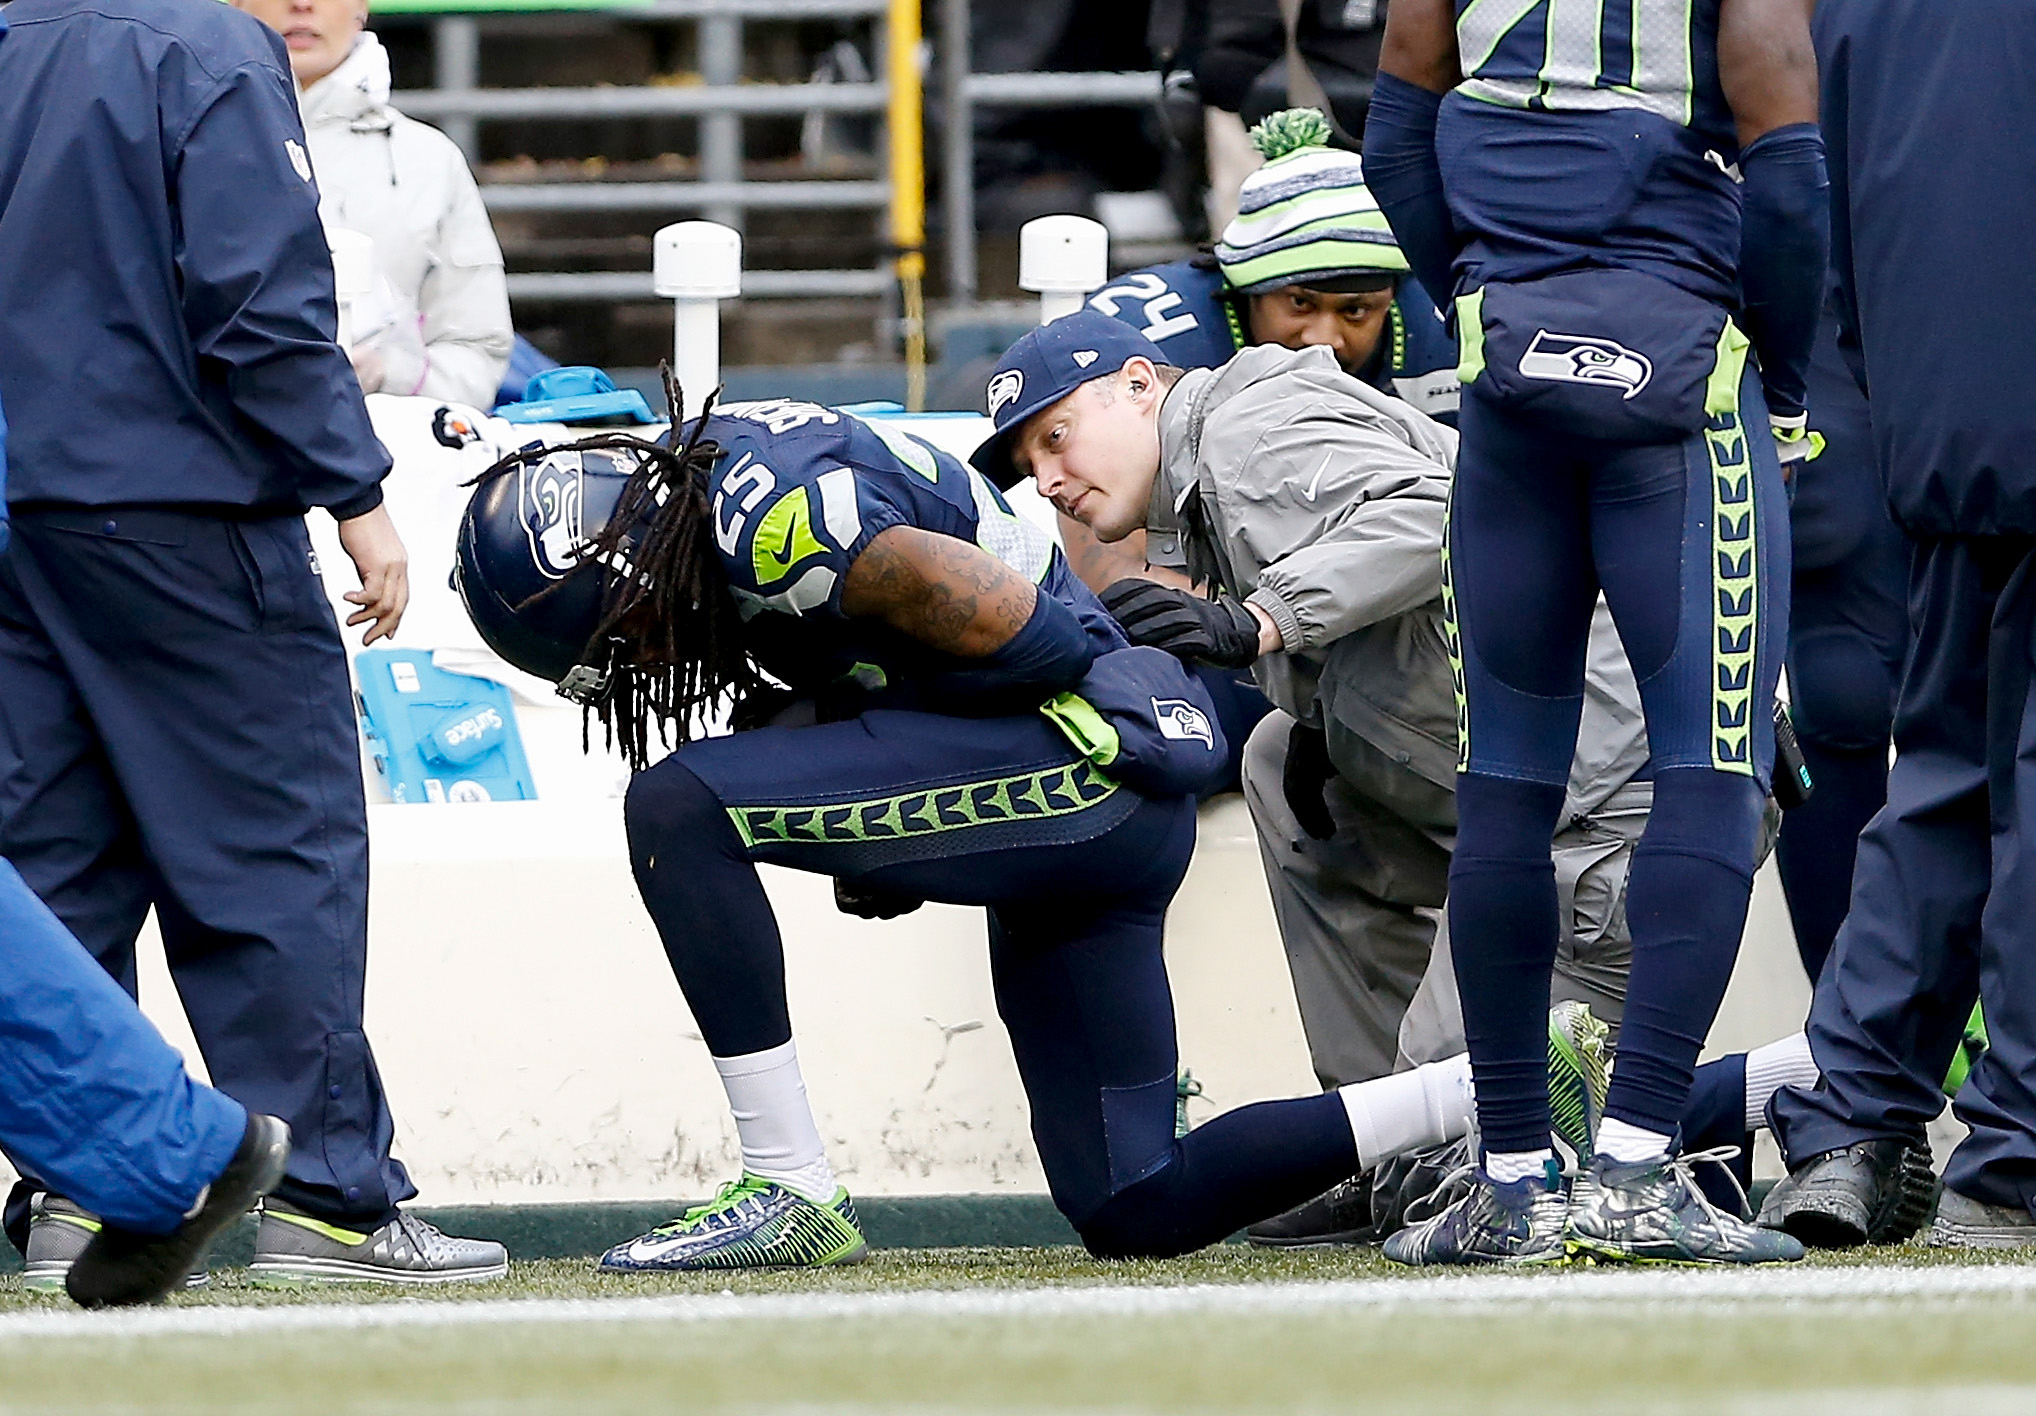 PHOTO: Richard Sherman #25 of the Seattle Seahawks injures himself making a play against the Green Bay Packers during the fourth quarter of the 2015 NFC Championship game at CenturyLink Field, Jan. 18, 2015, in Seattle.